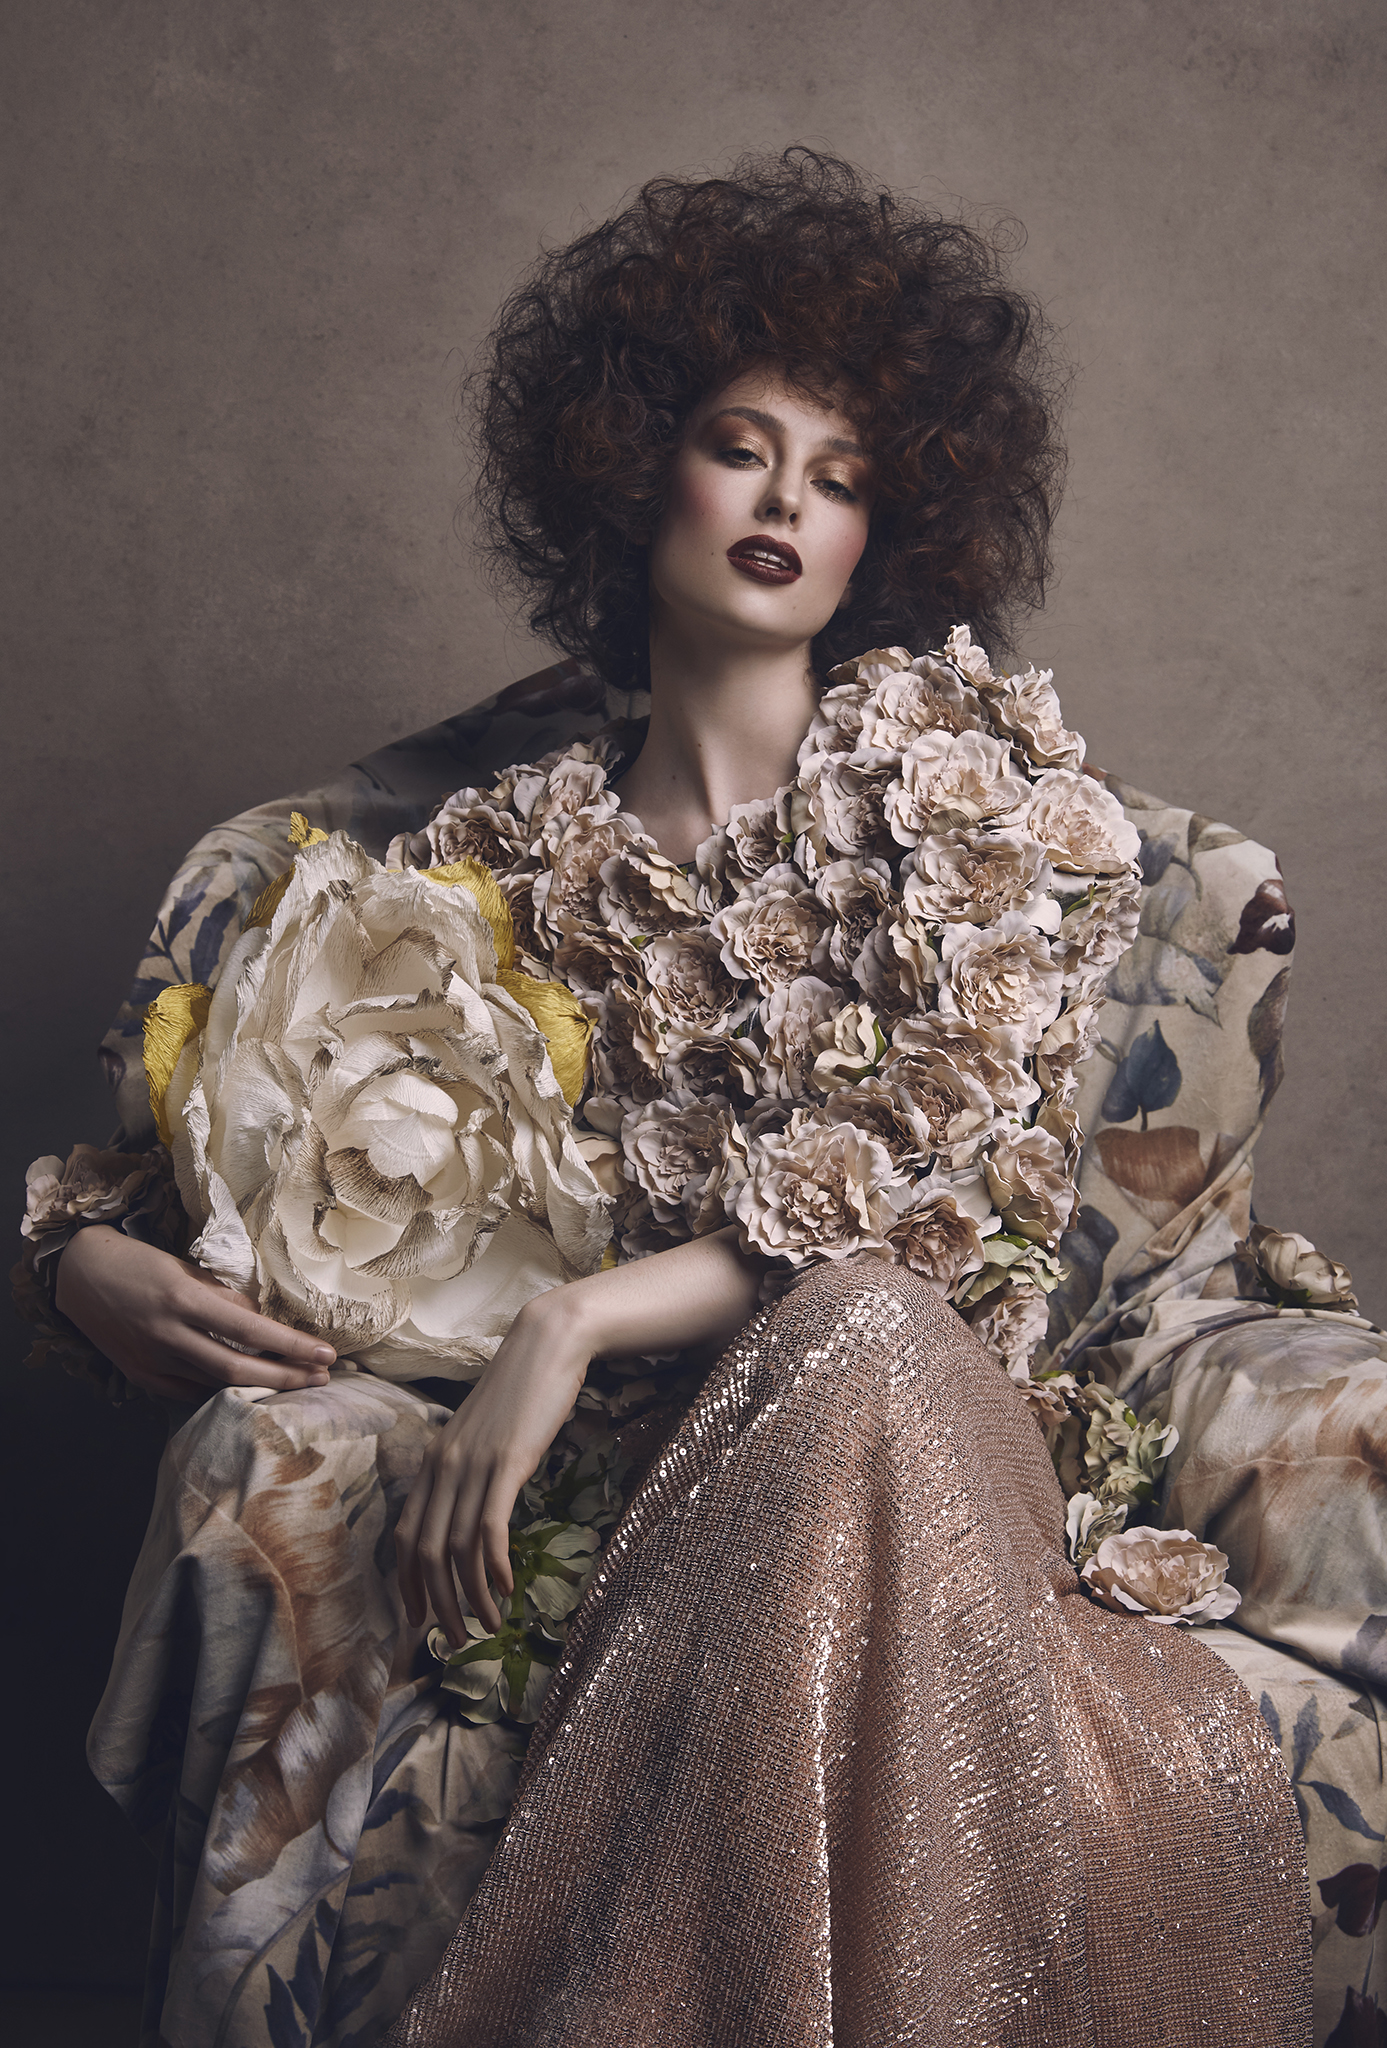 The-Flower-Book-by-Dana-Cole-floral-fashion-model-fashion-photography-fine-art-photography-beauty-photo-floral-shoot-vanity-fair-1.jpg